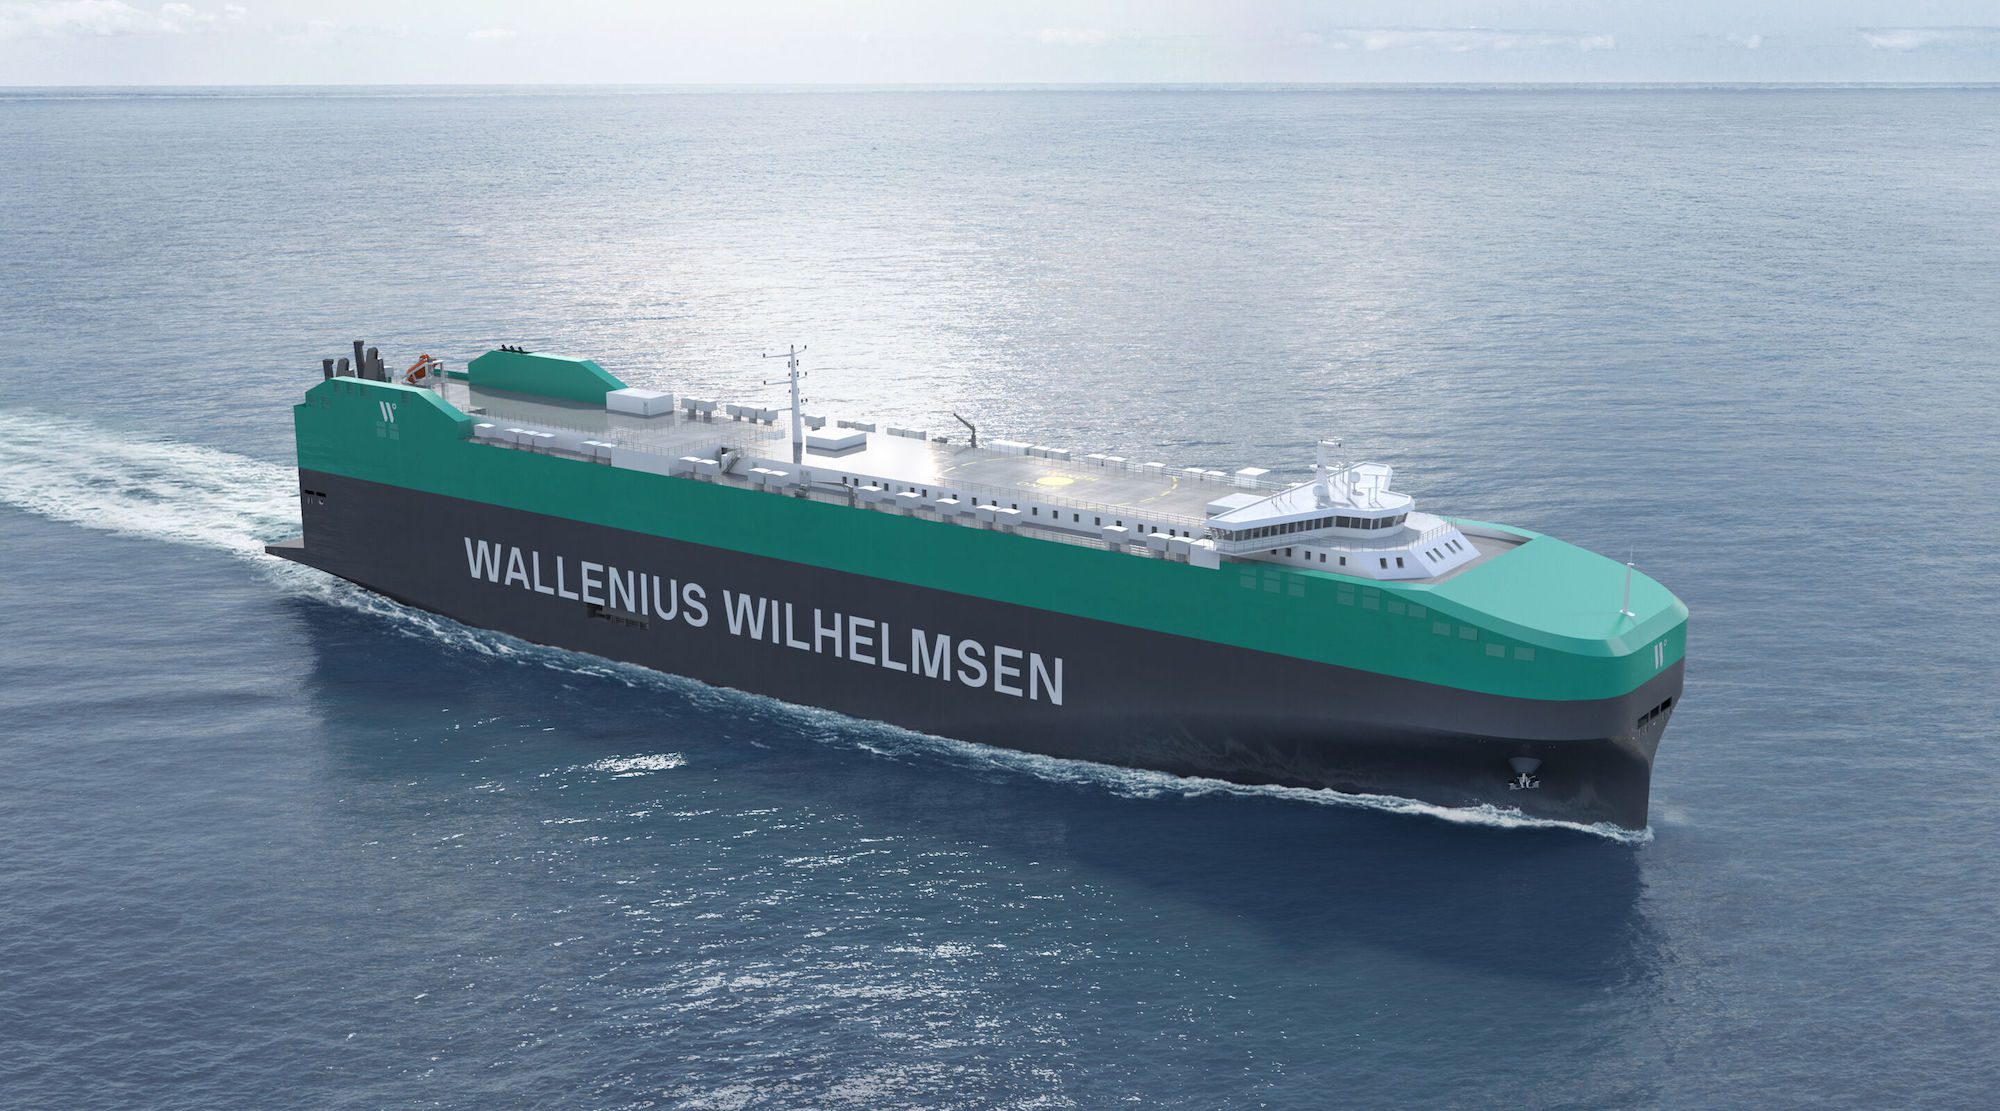 An illustration of Wallenius Wilhelmsen's "The Shaper Class" pure car and truck carriers. Illustration courtesy Wallenius Wilhelmsen